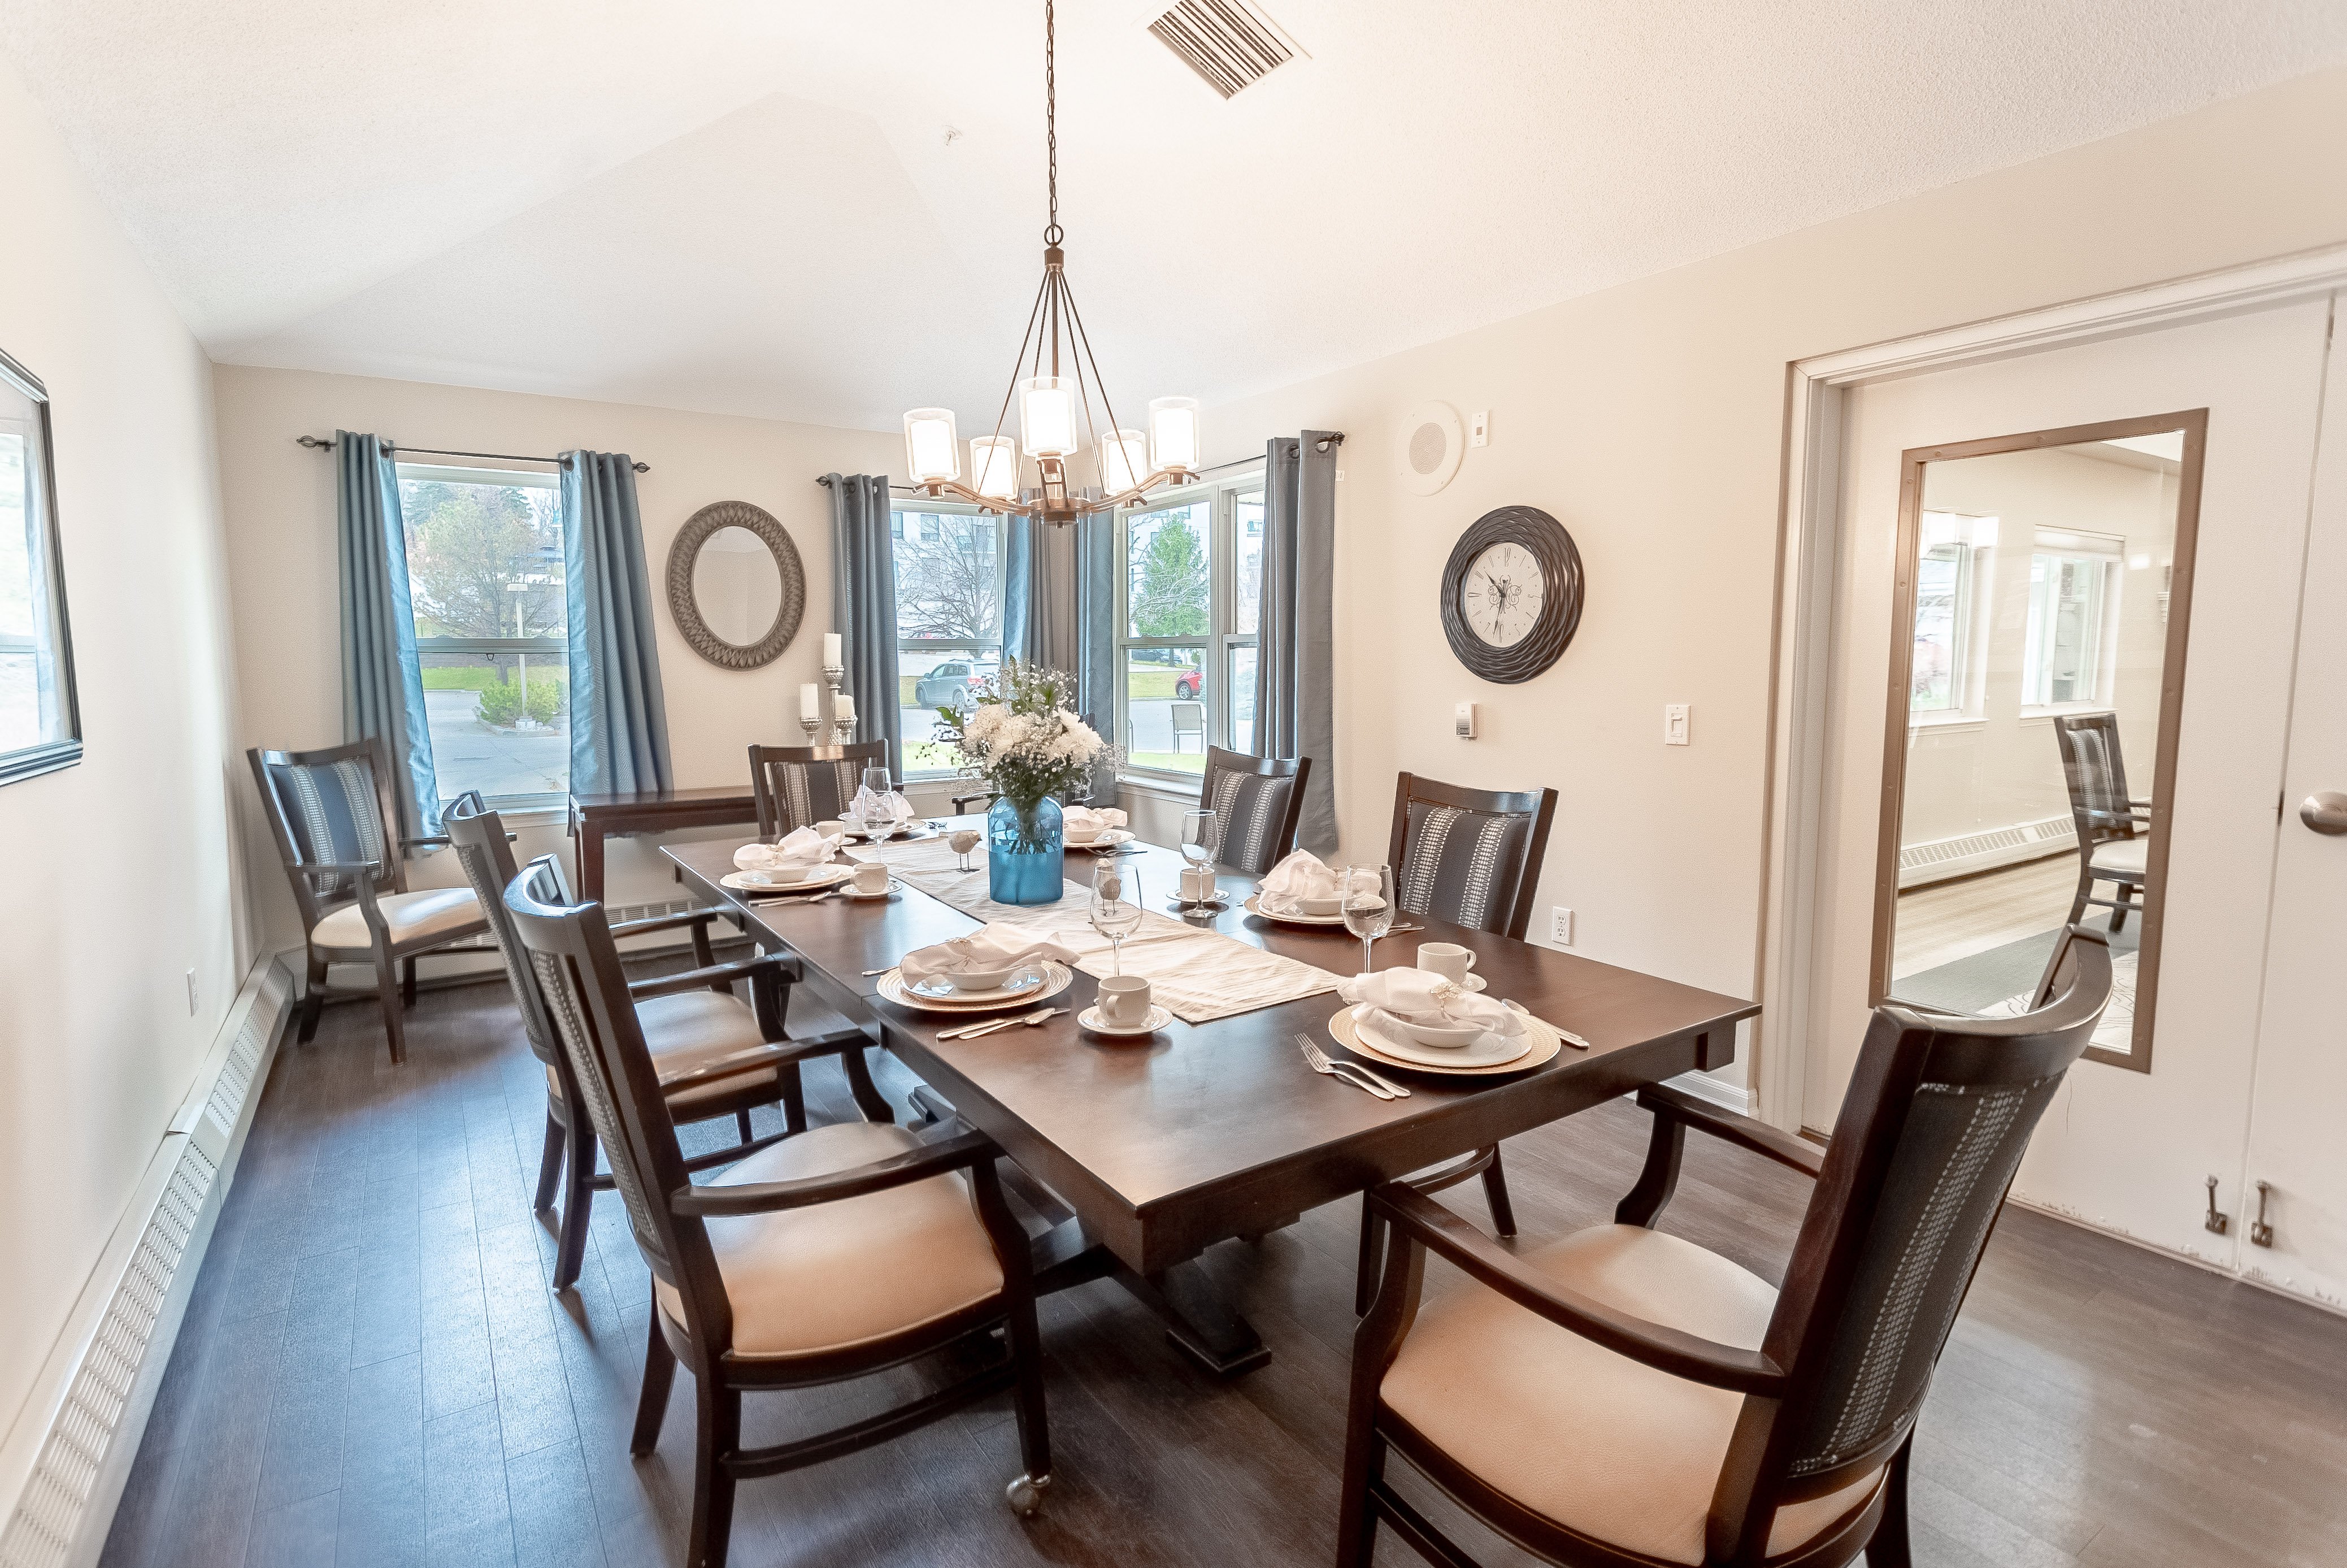 Private dining room at Masonville Manor Retirement Residence